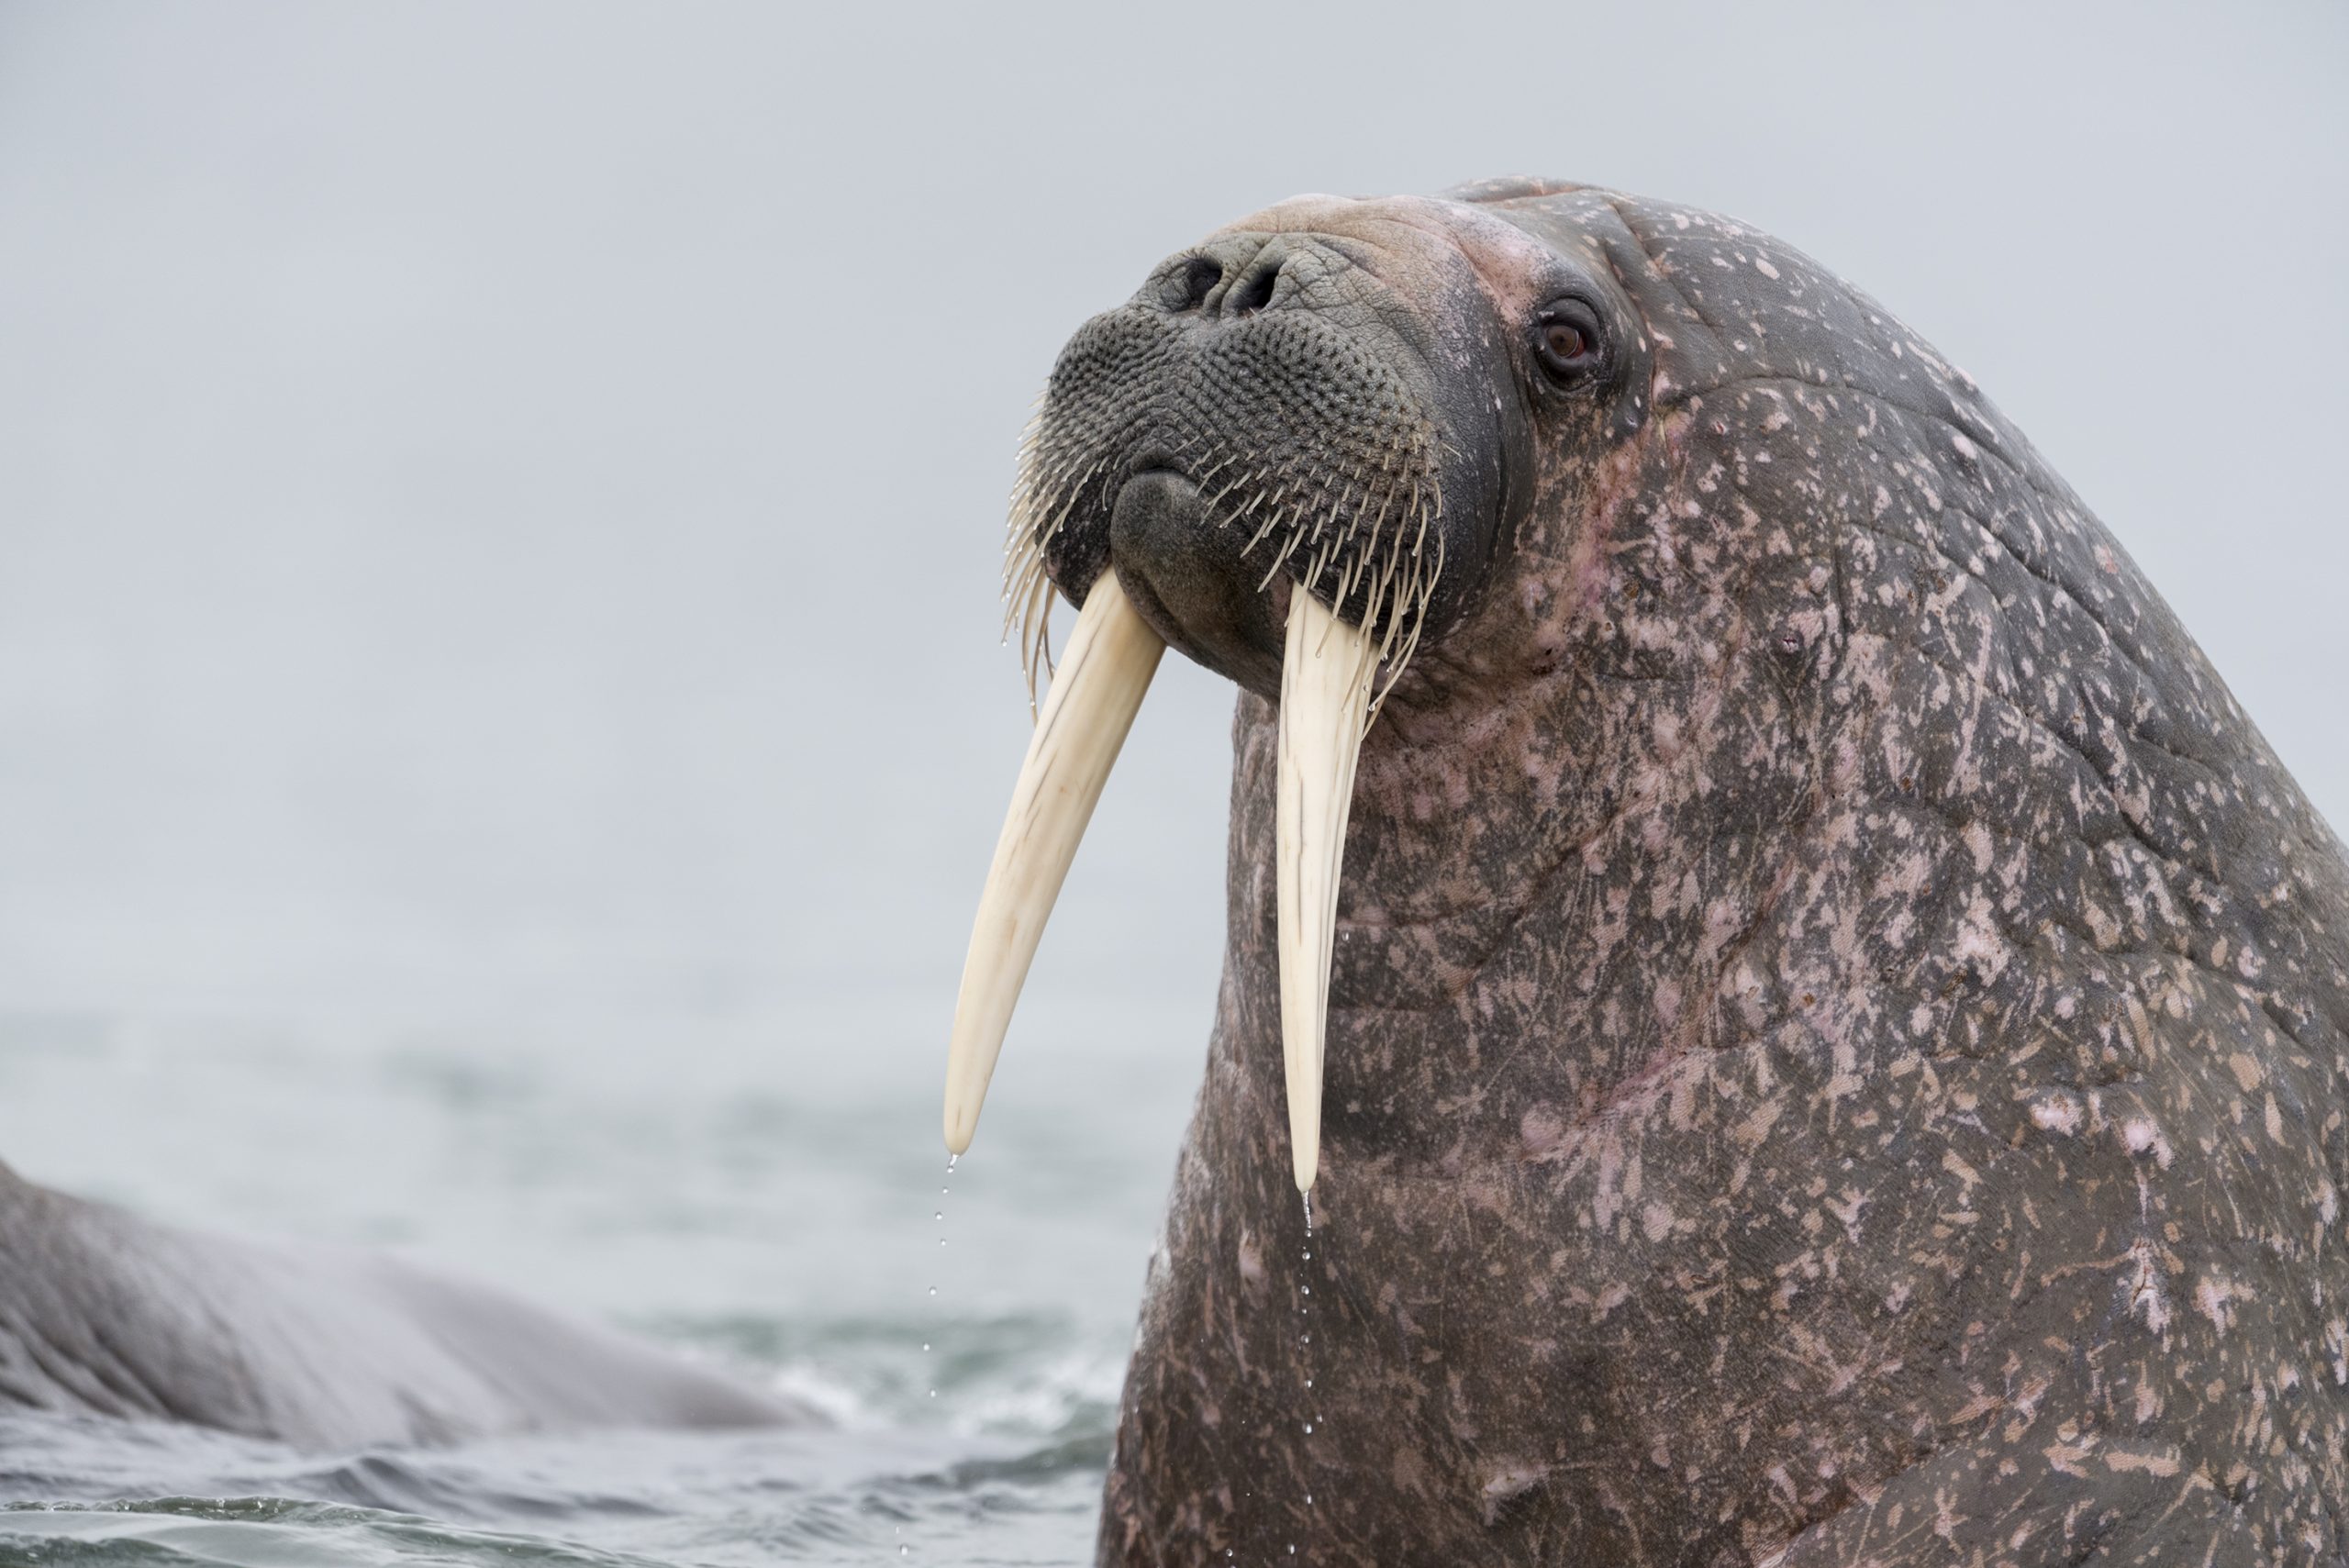 <p>A walrus on a beach in Svalbard, a Norwegian archipelago in the Arctic. Microplastics from fishing boats may be making their way up the Arctic food chain – from krill, to fish, seals, walruses and humans (Image © Christian Åslund / Greenpeace)</p>